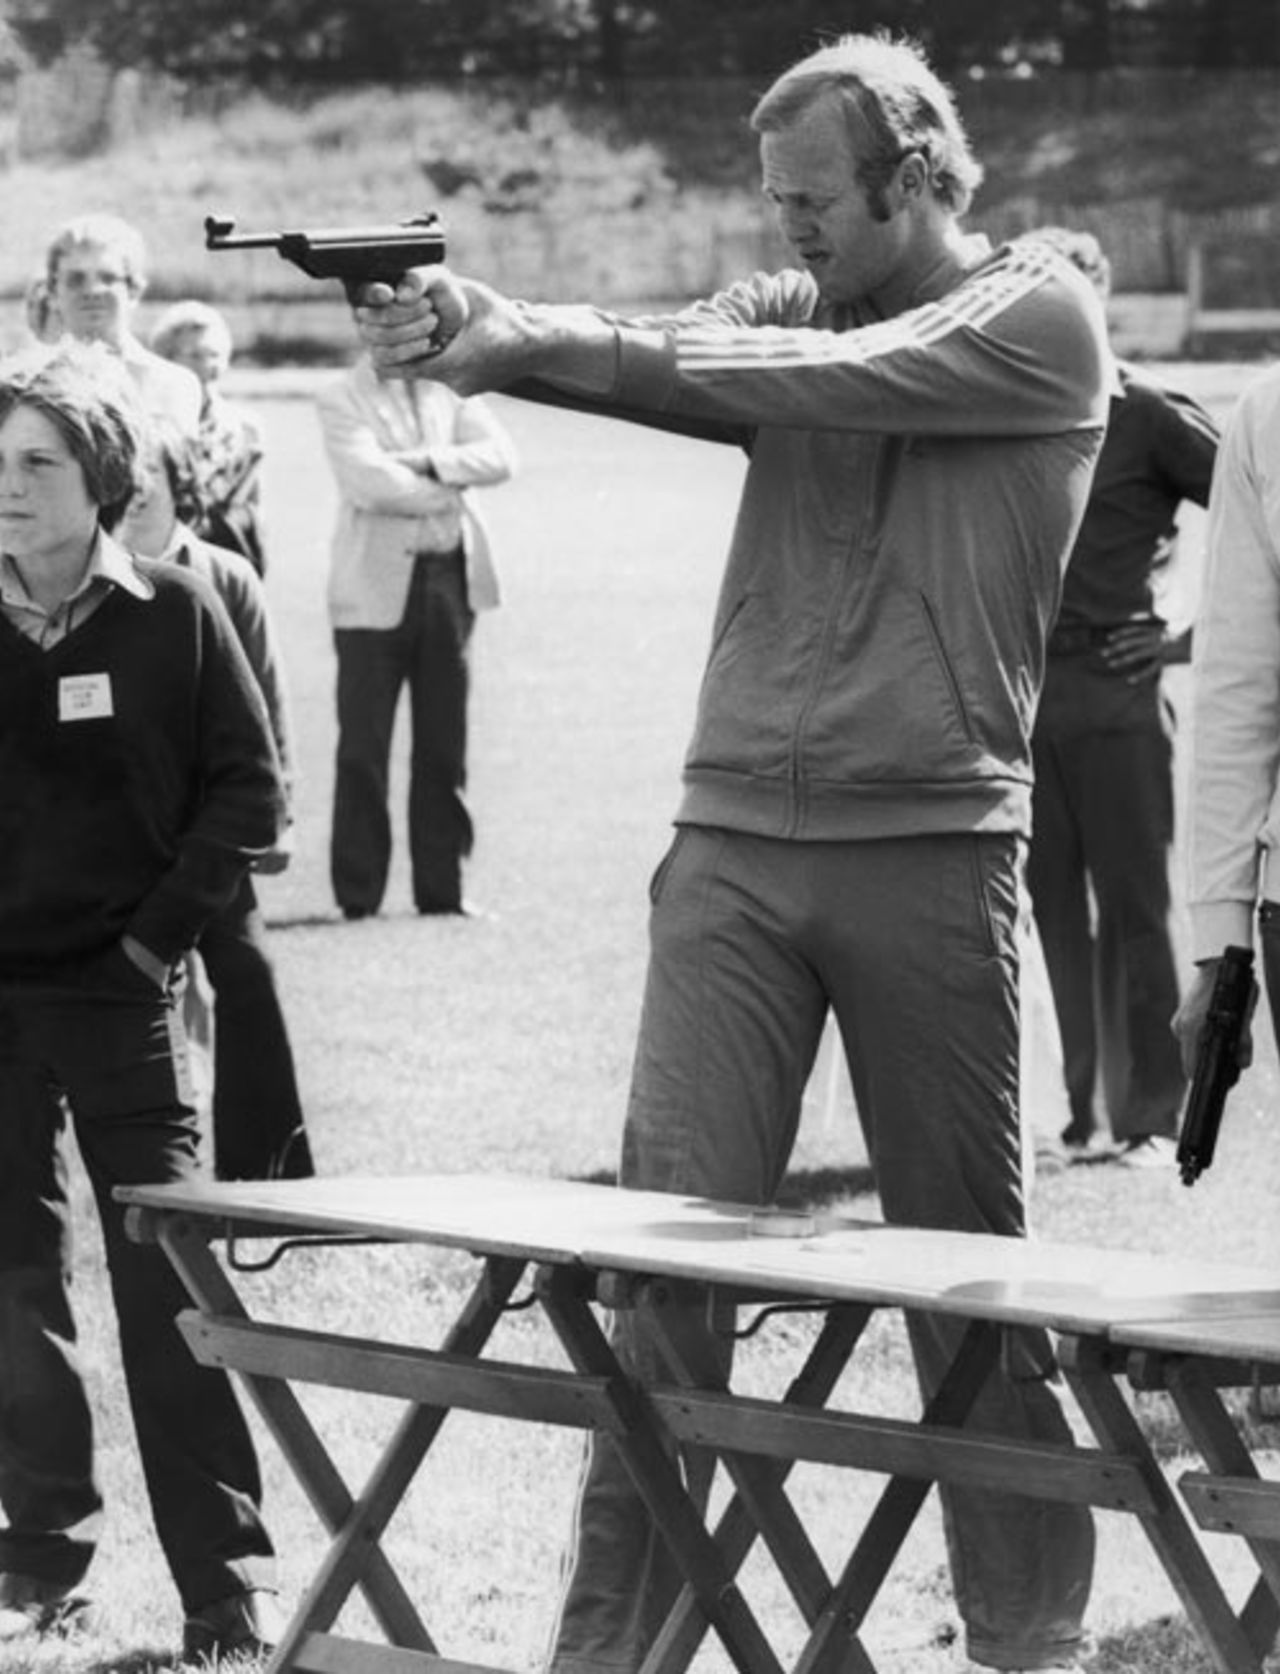 Tony Greig takes aim during the target-shooting event on the 'Superstars' television program, July 22, 1974